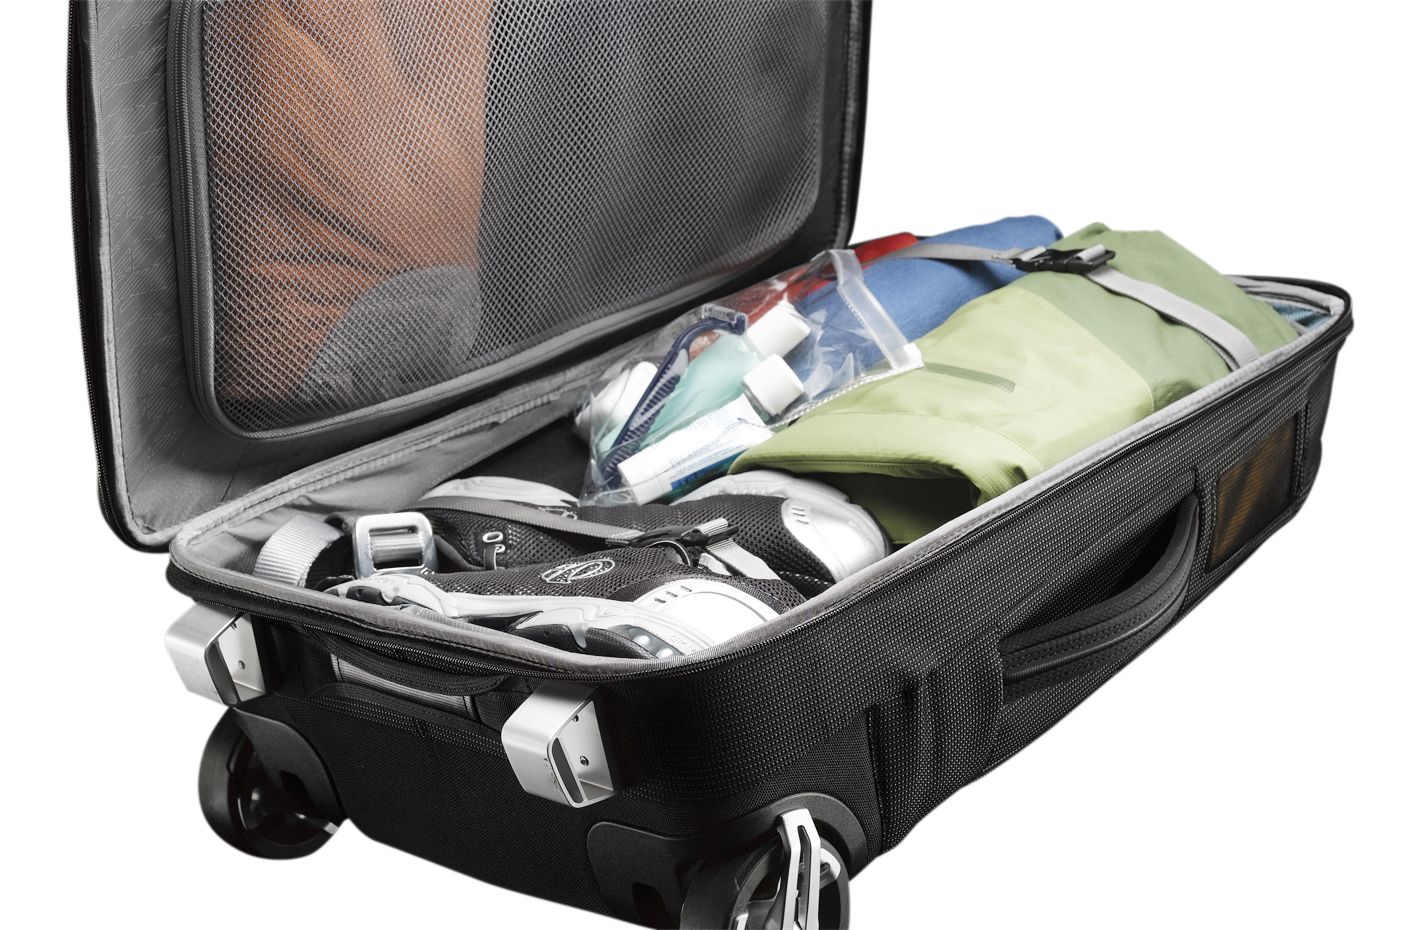 Thule Crossover 56cm/22" Rolling Carry-On